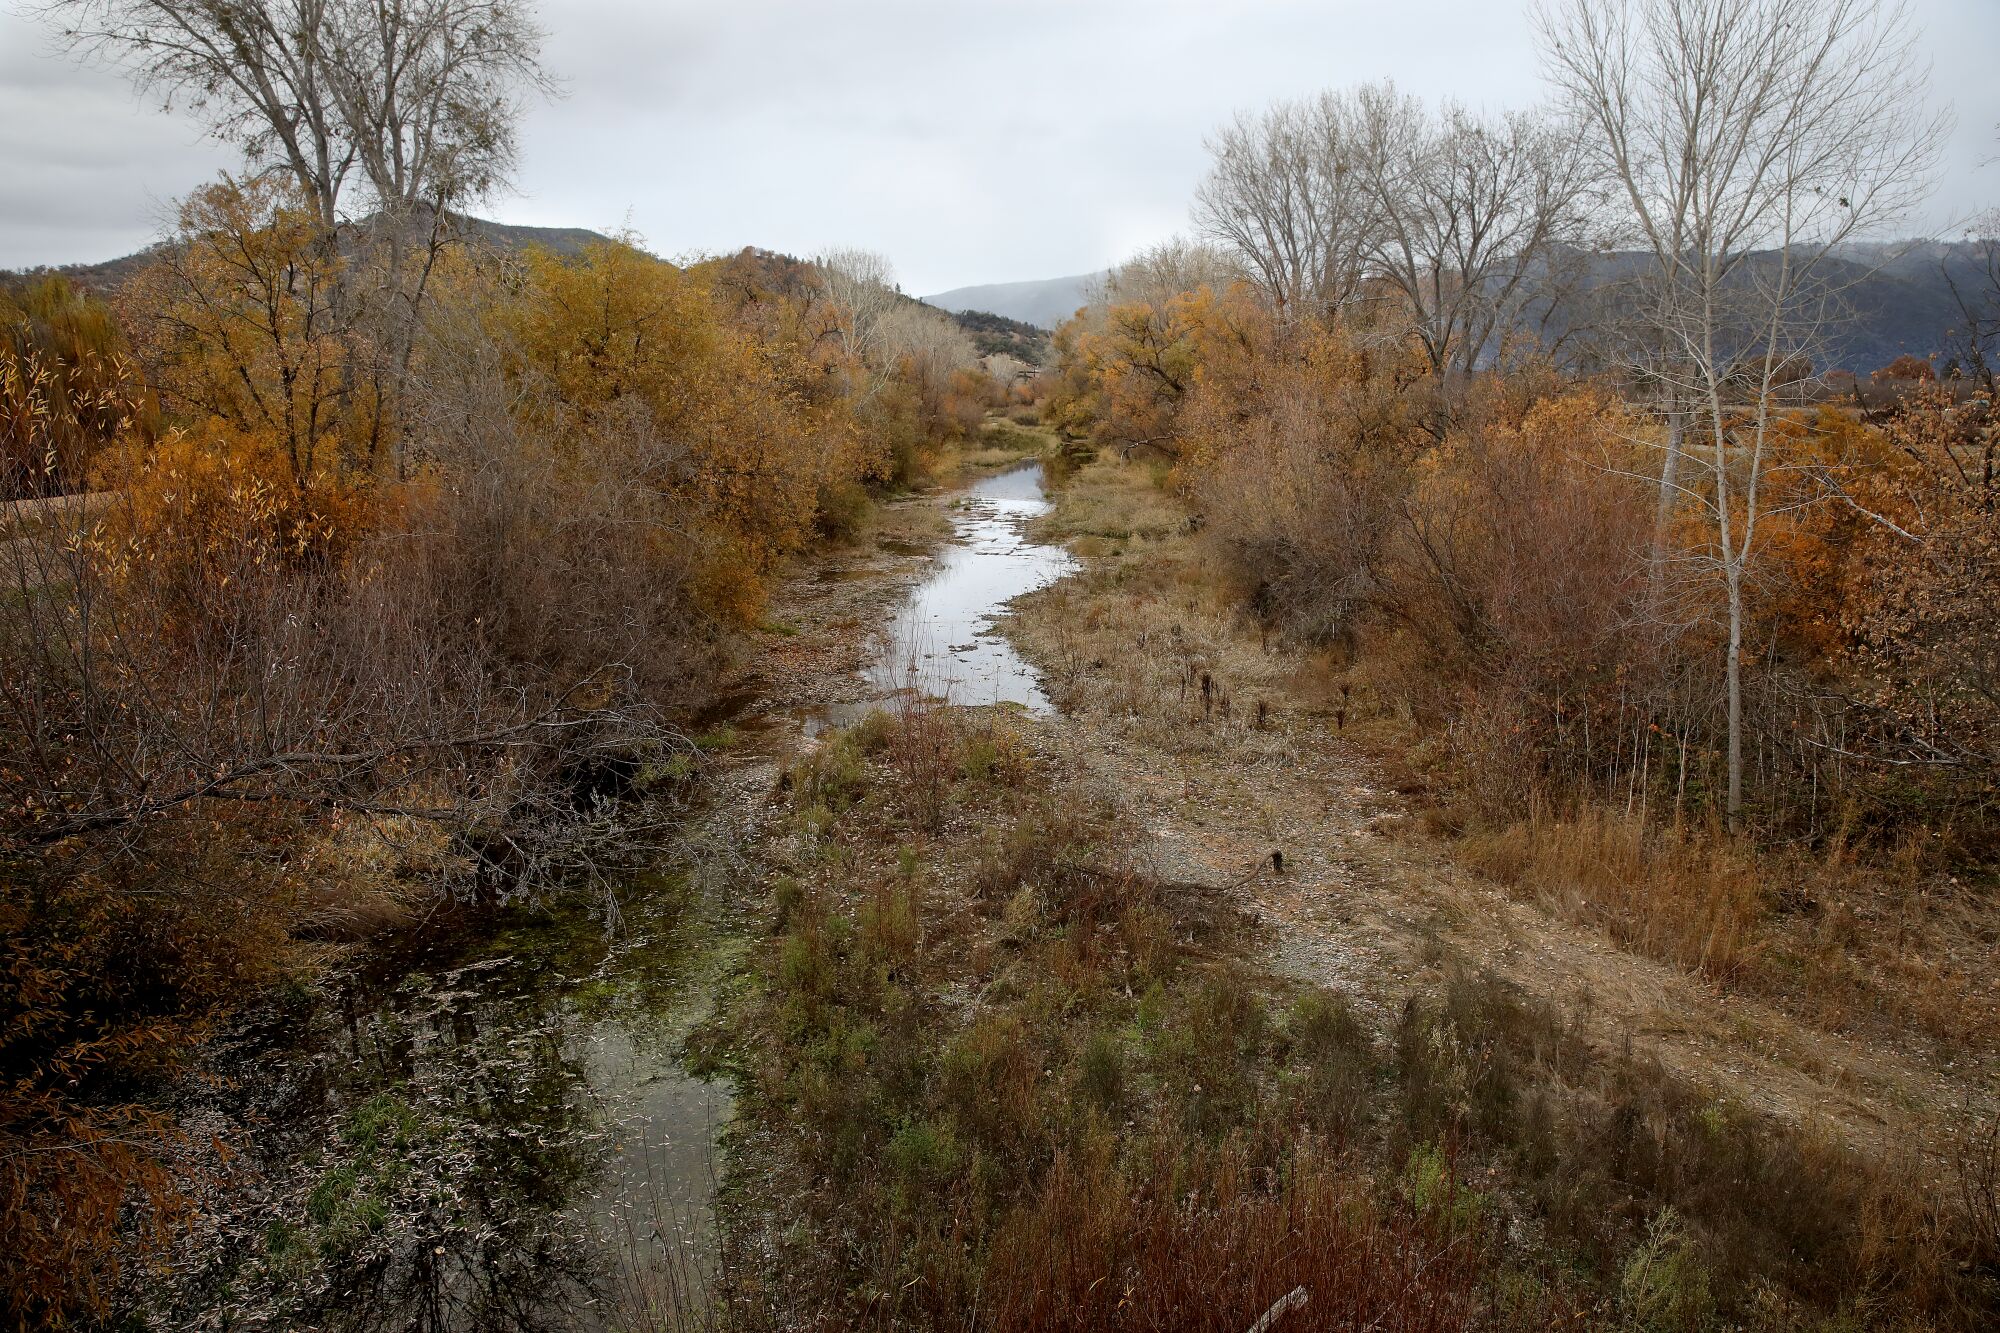 Low water levels along Middle Creek.